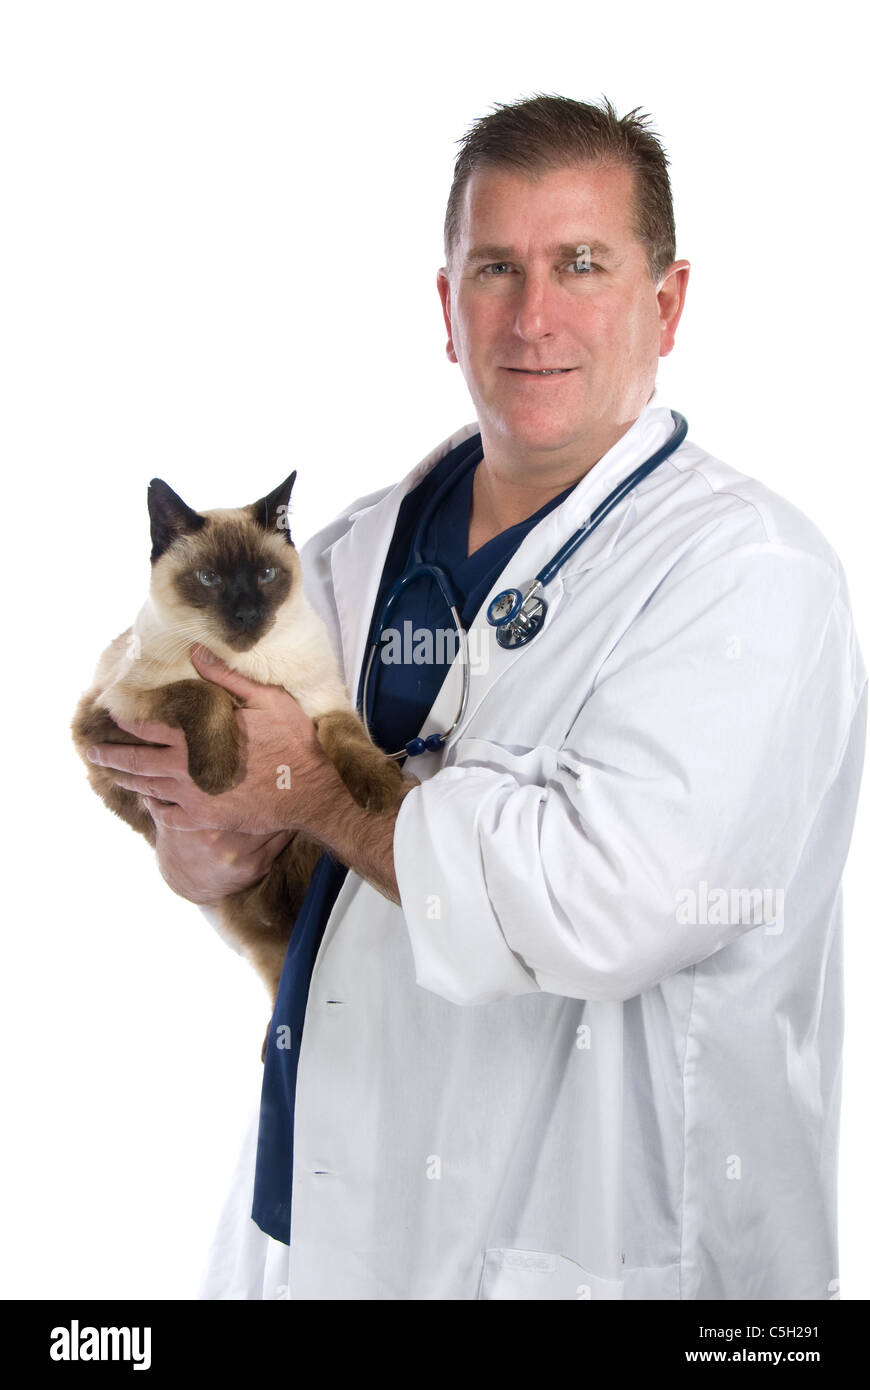 Male veterinarian holding a cat after an examination Stock Photo